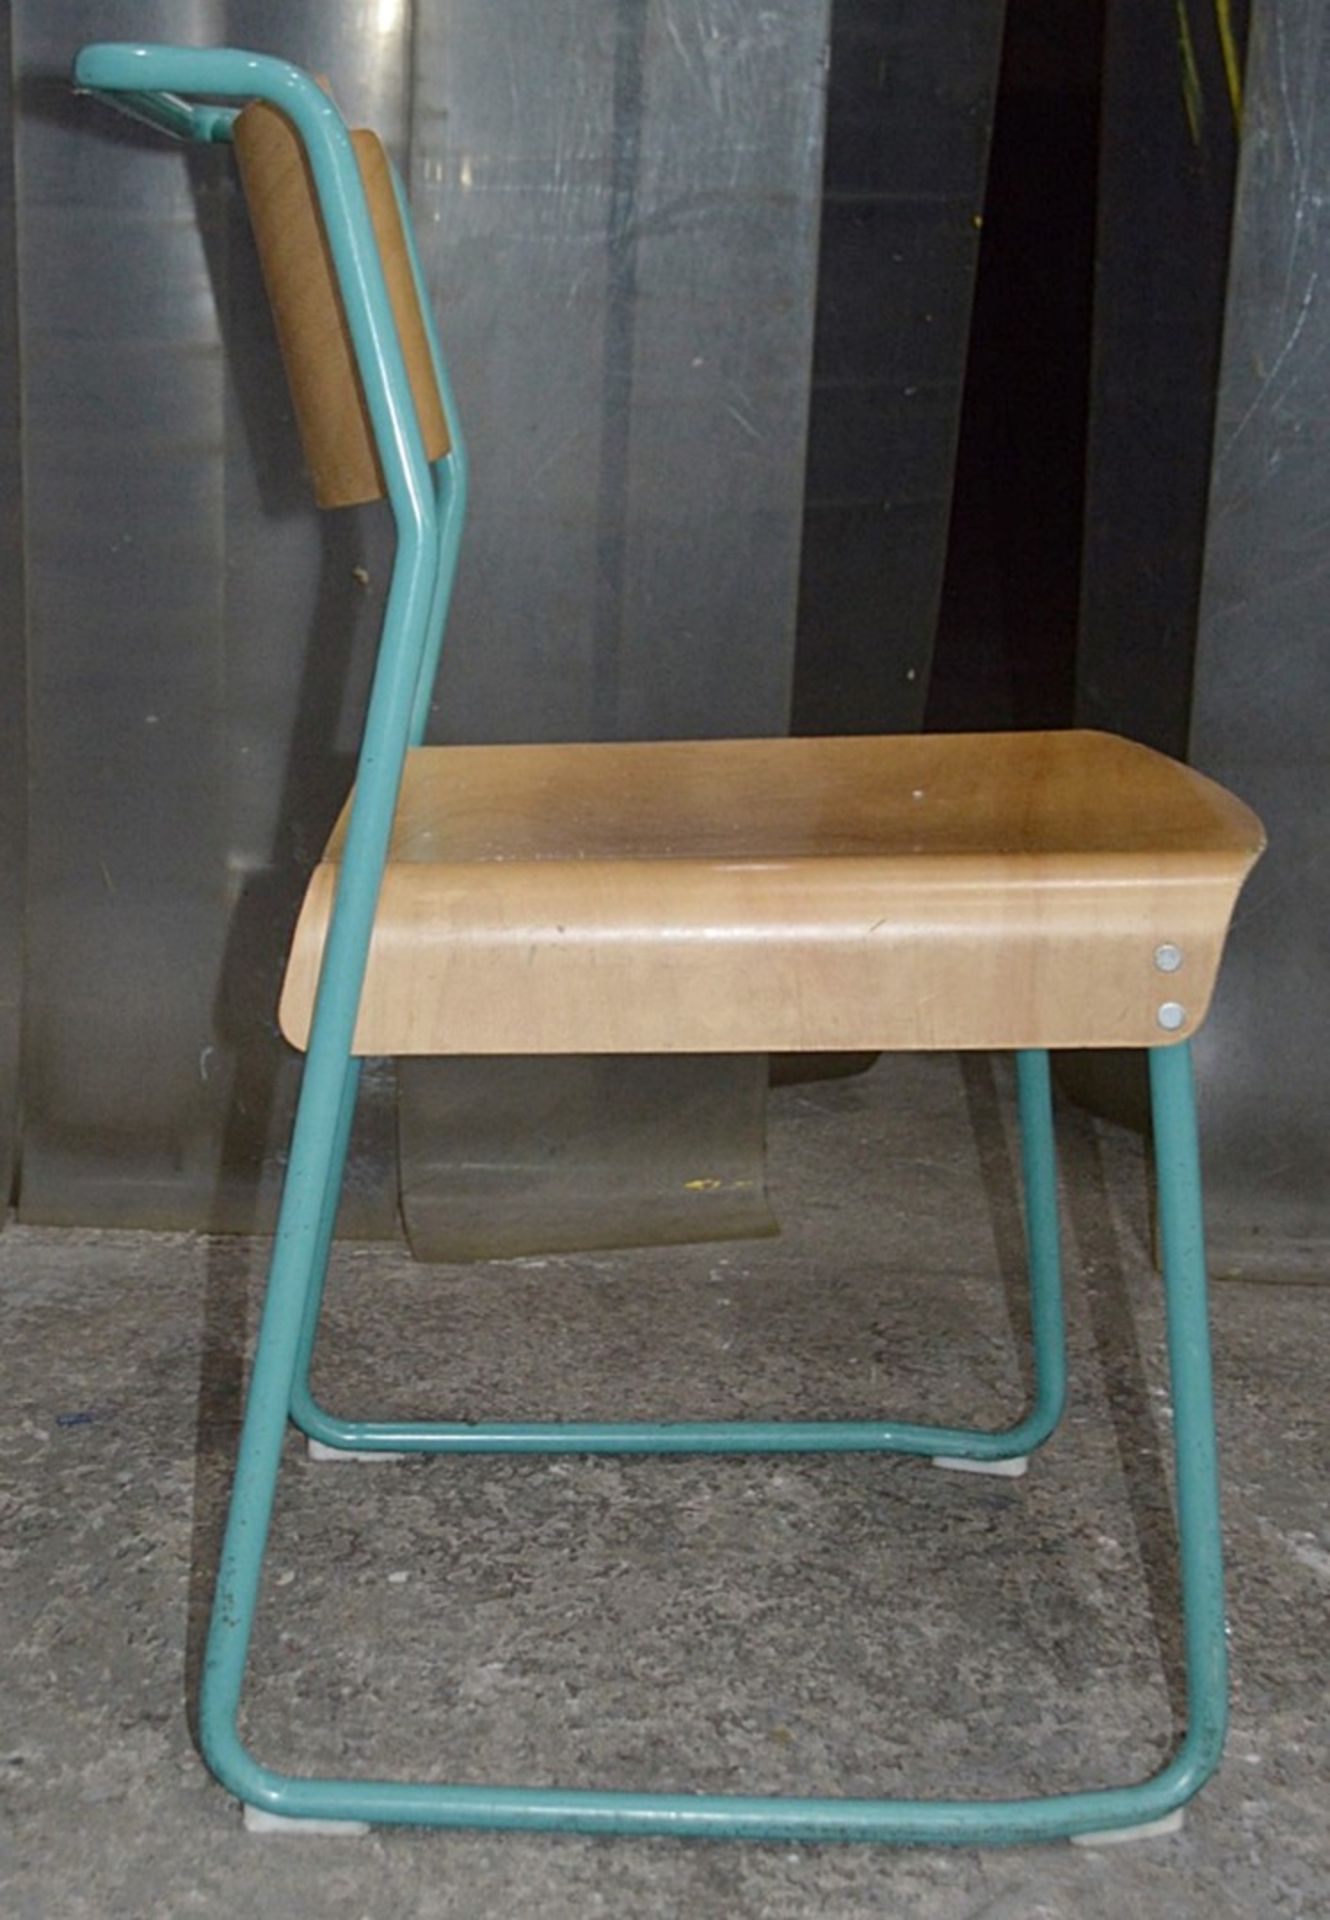 12 x Contemporary Stackable Bistro / Bar Chairs With Metal Frames In Teal With Curved Vanished - Image 10 of 11